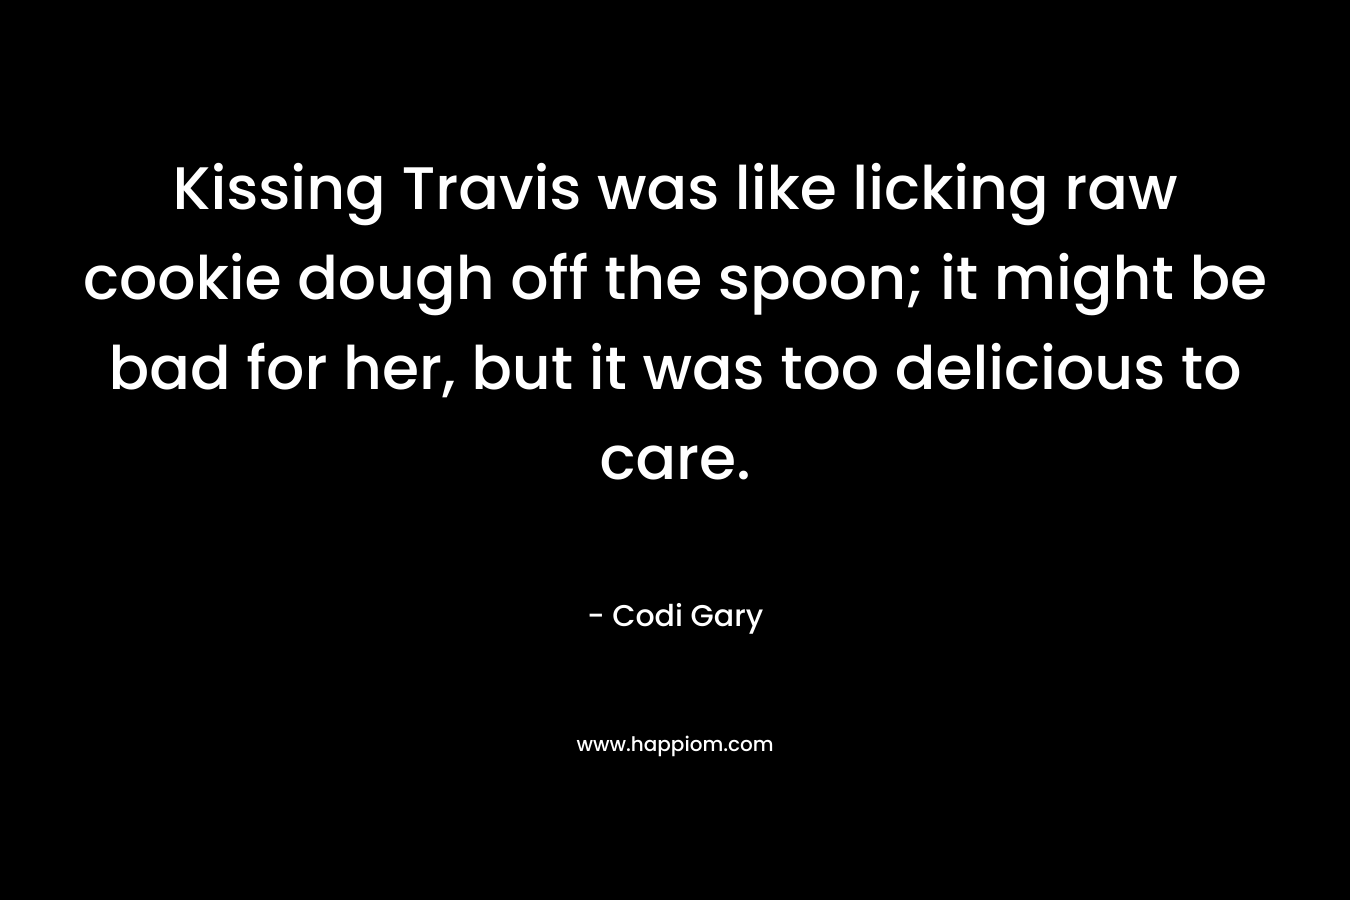 Kissing Travis was like licking raw cookie dough off the spoon; it might be bad for her, but it was too delicious to care.